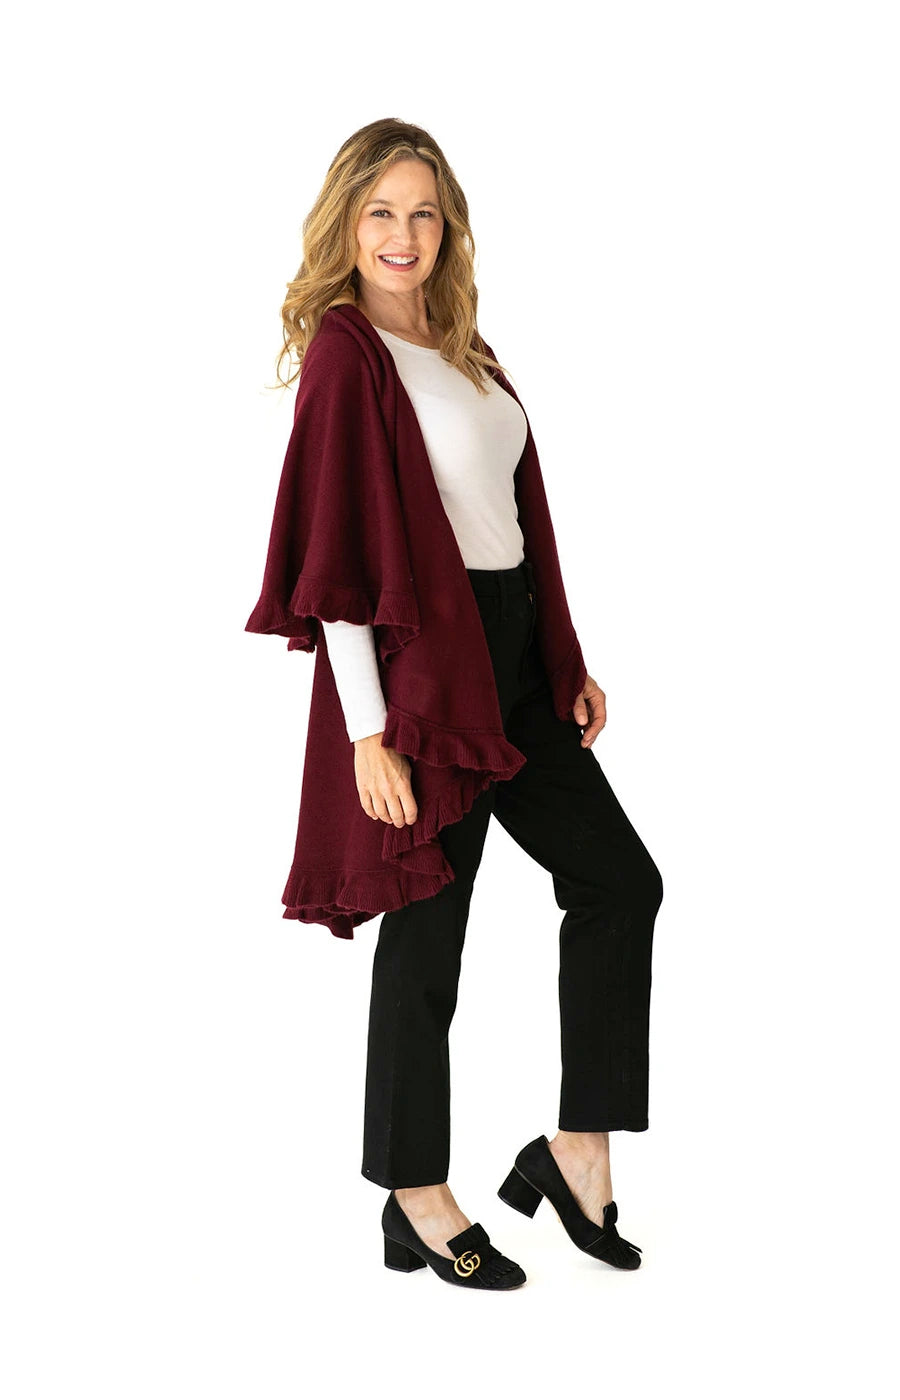 Shawl Sweater Vest in Burgundy with Ruffle Trim